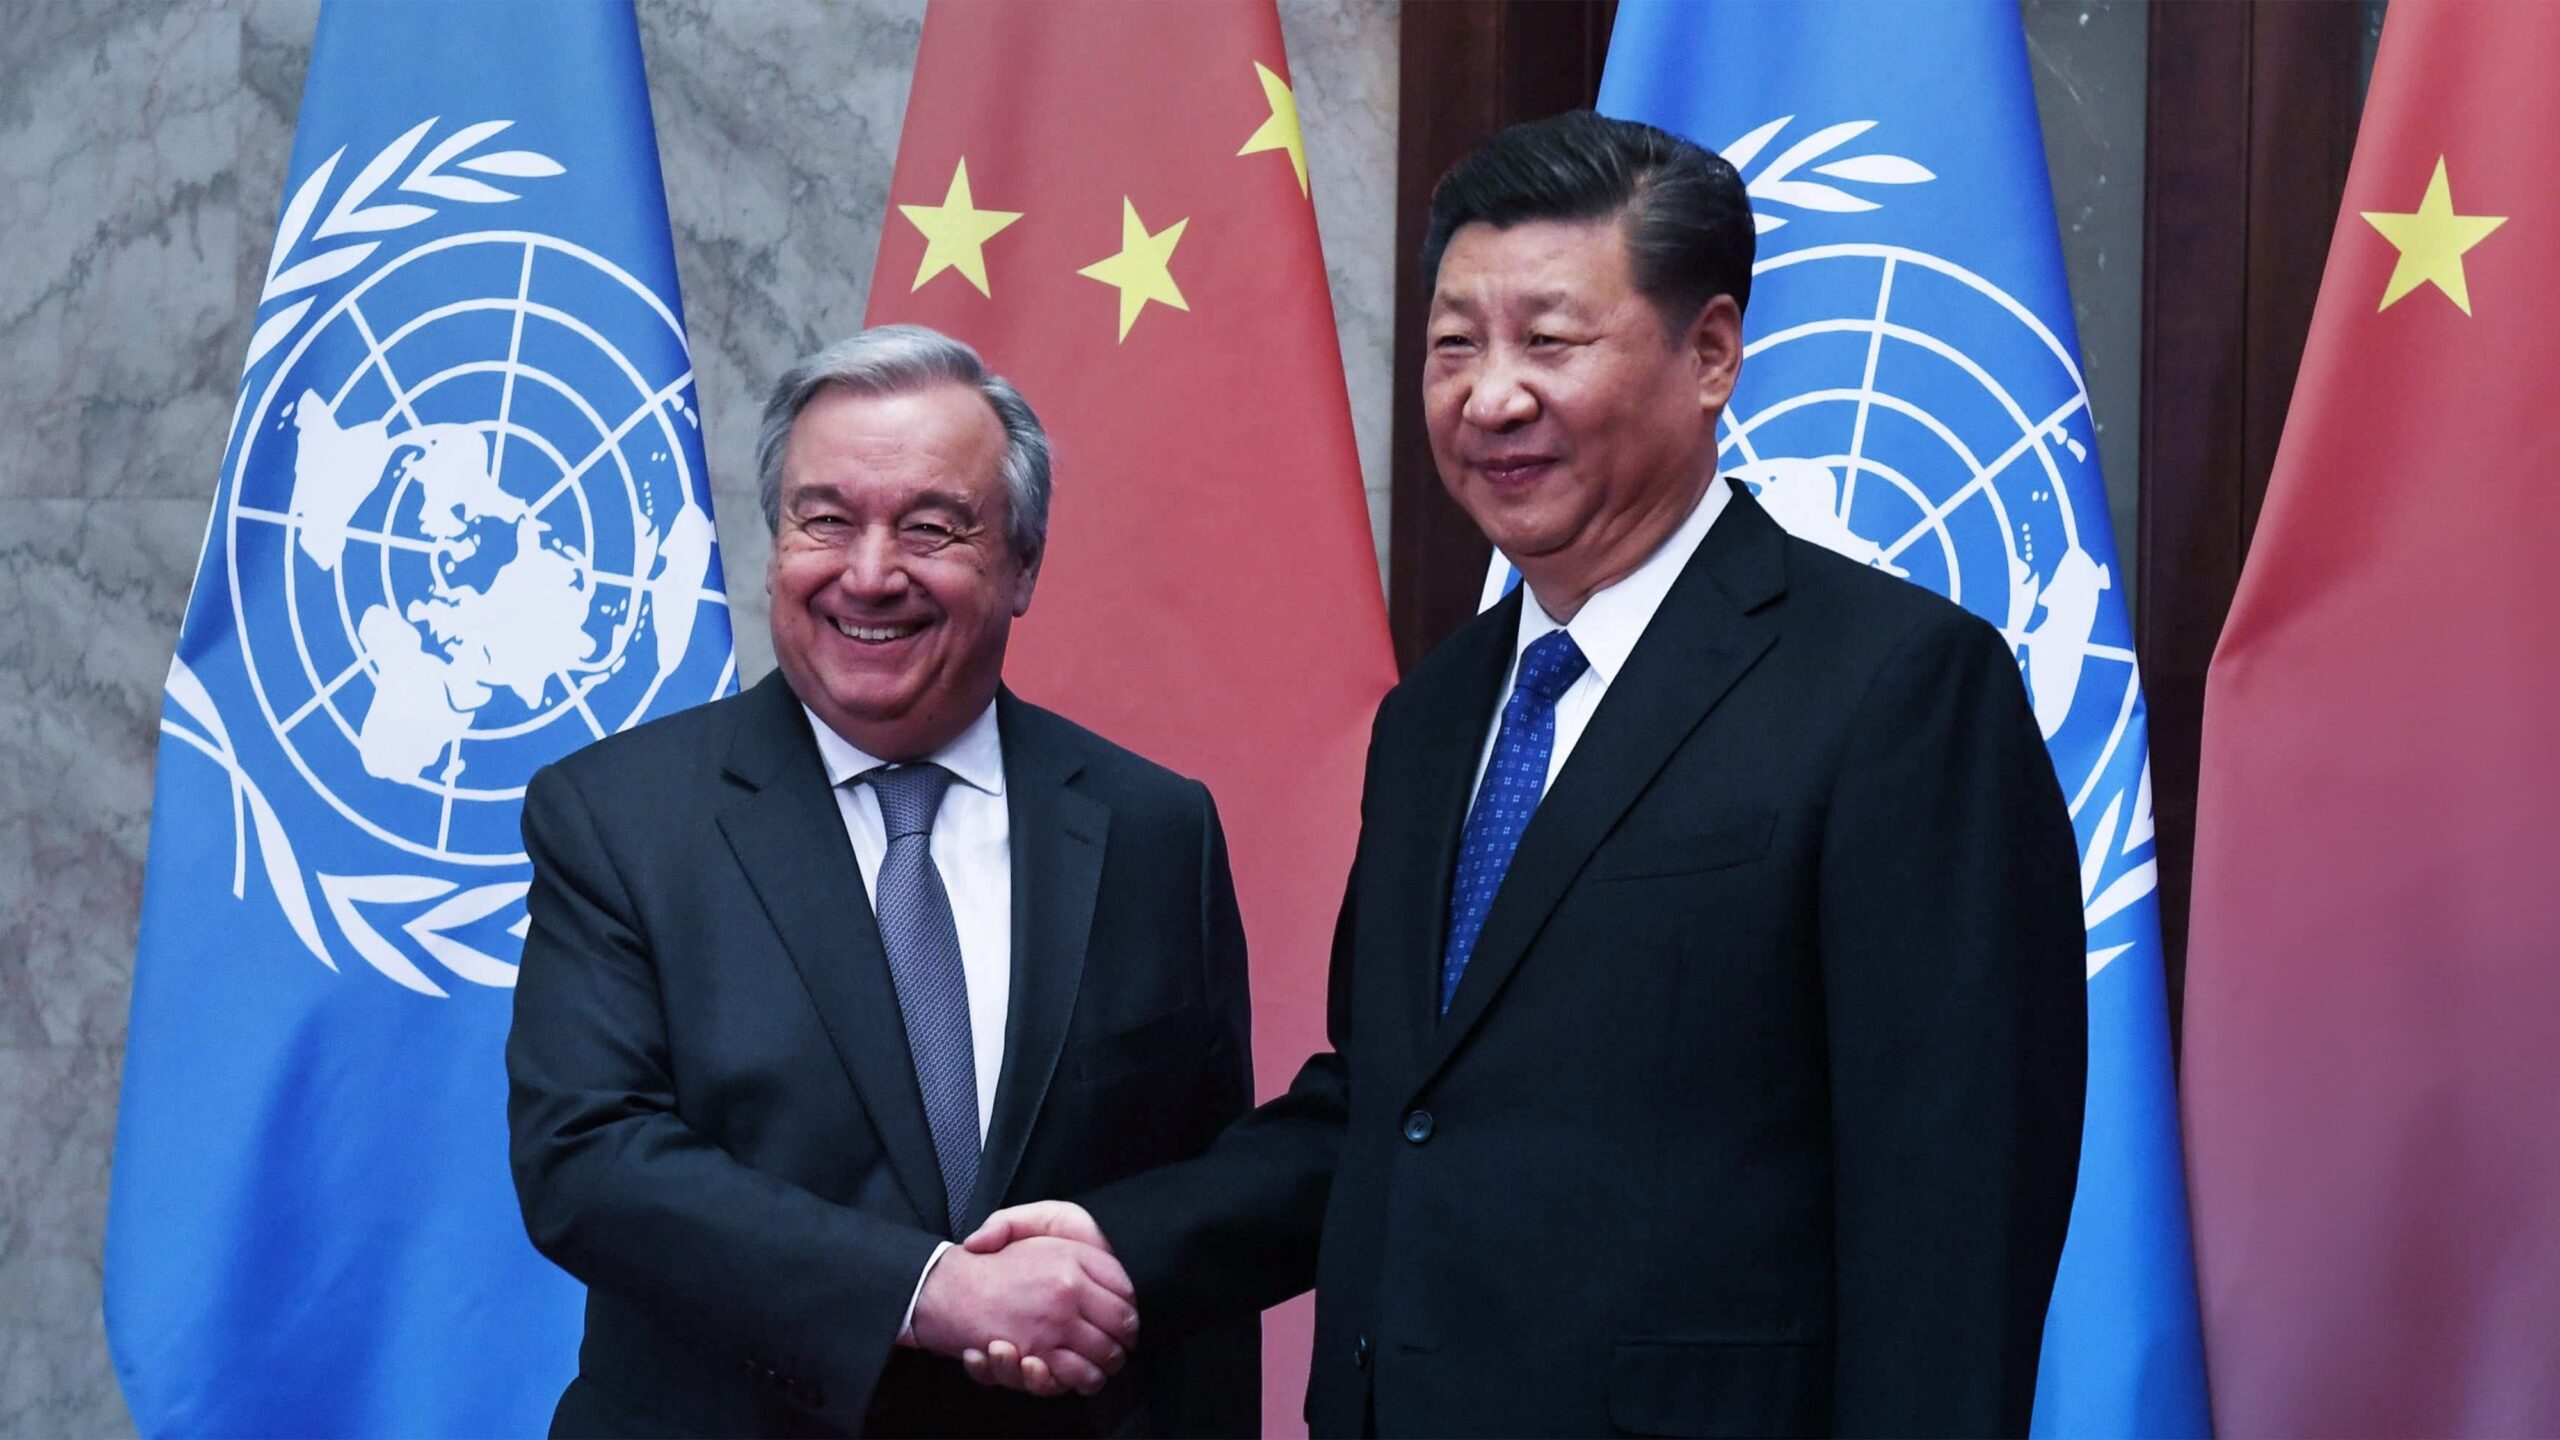 Leaked Emails Confirm UN Gave Names of Dissidents to Chinese Communist Party - Harbingers Daily